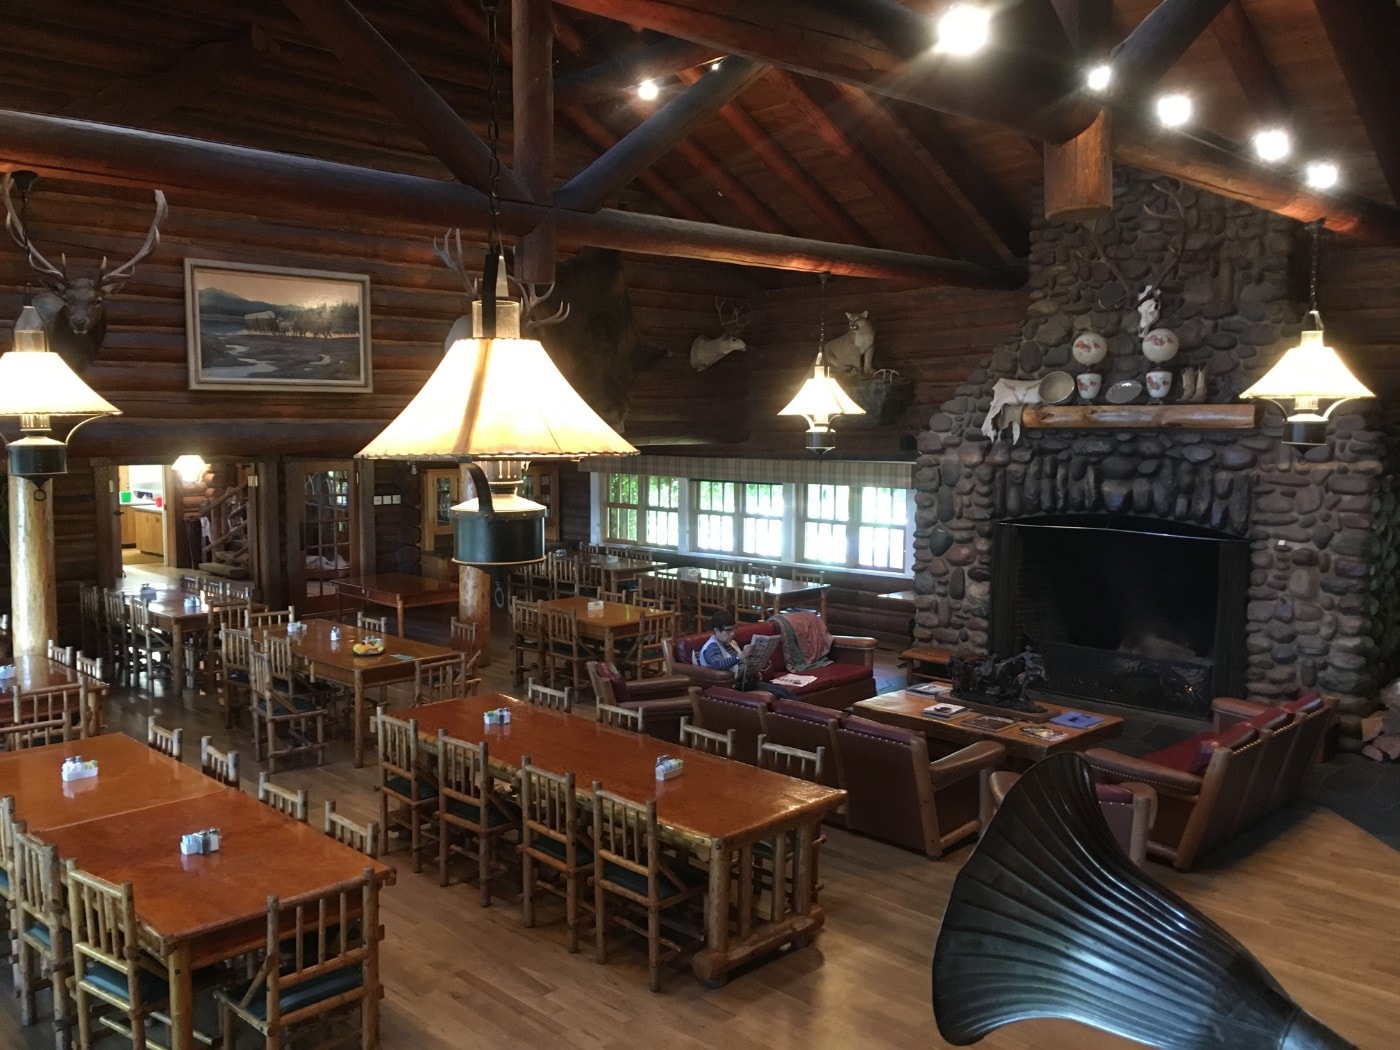 Dining Room & Living Room at Flathead Lake Lodge in Montana